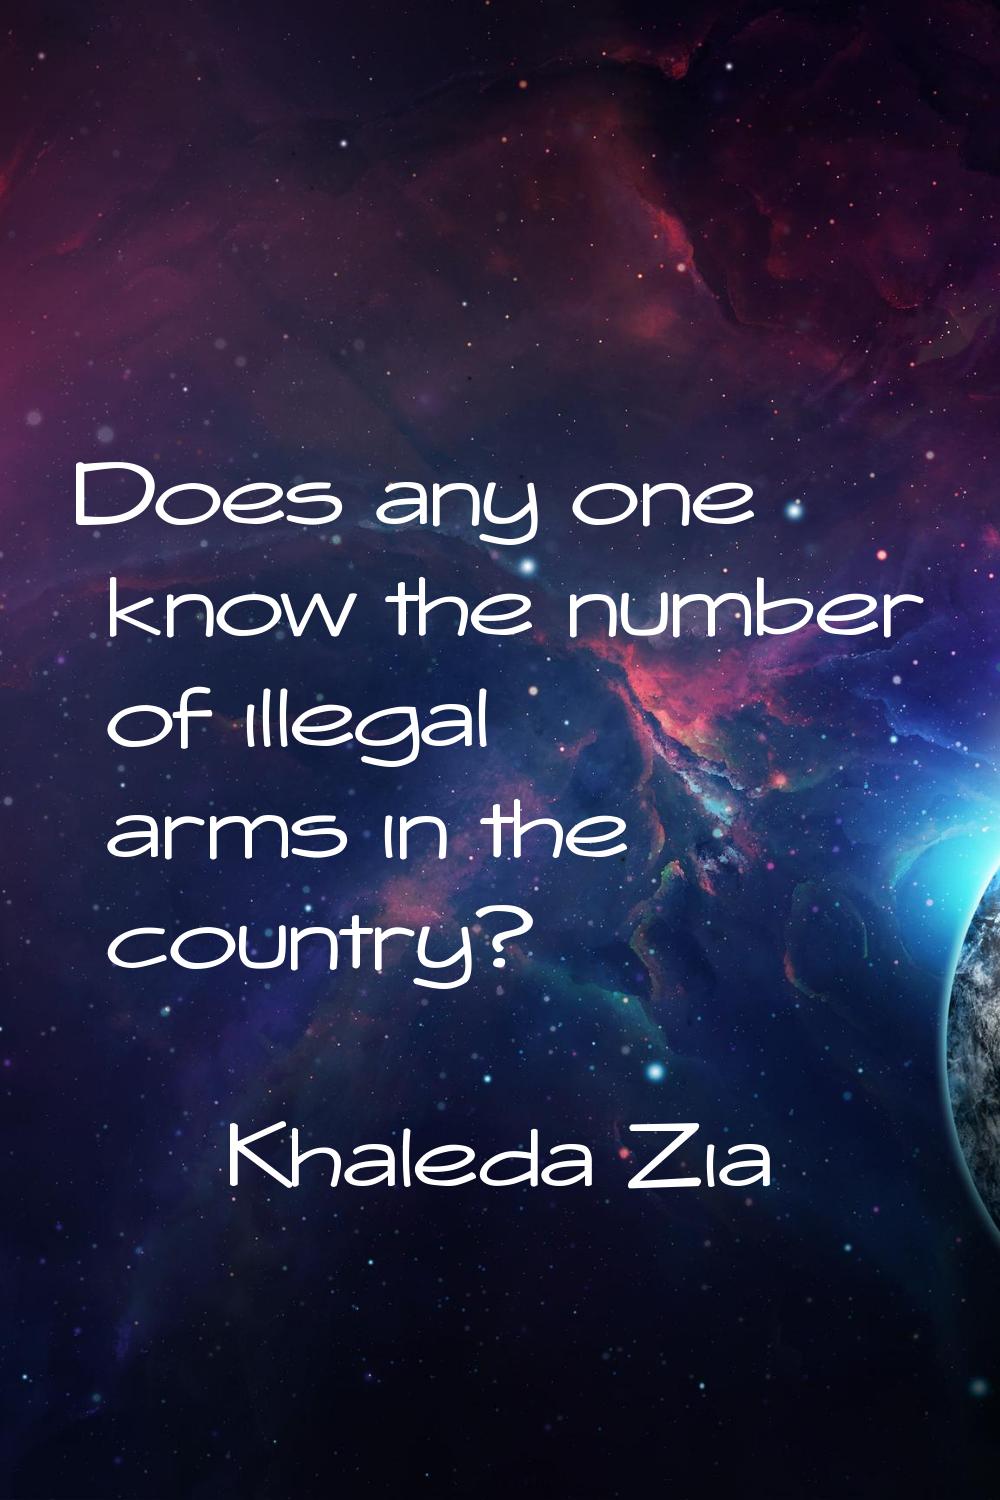 Does any one know the number of illegal arms in the country?